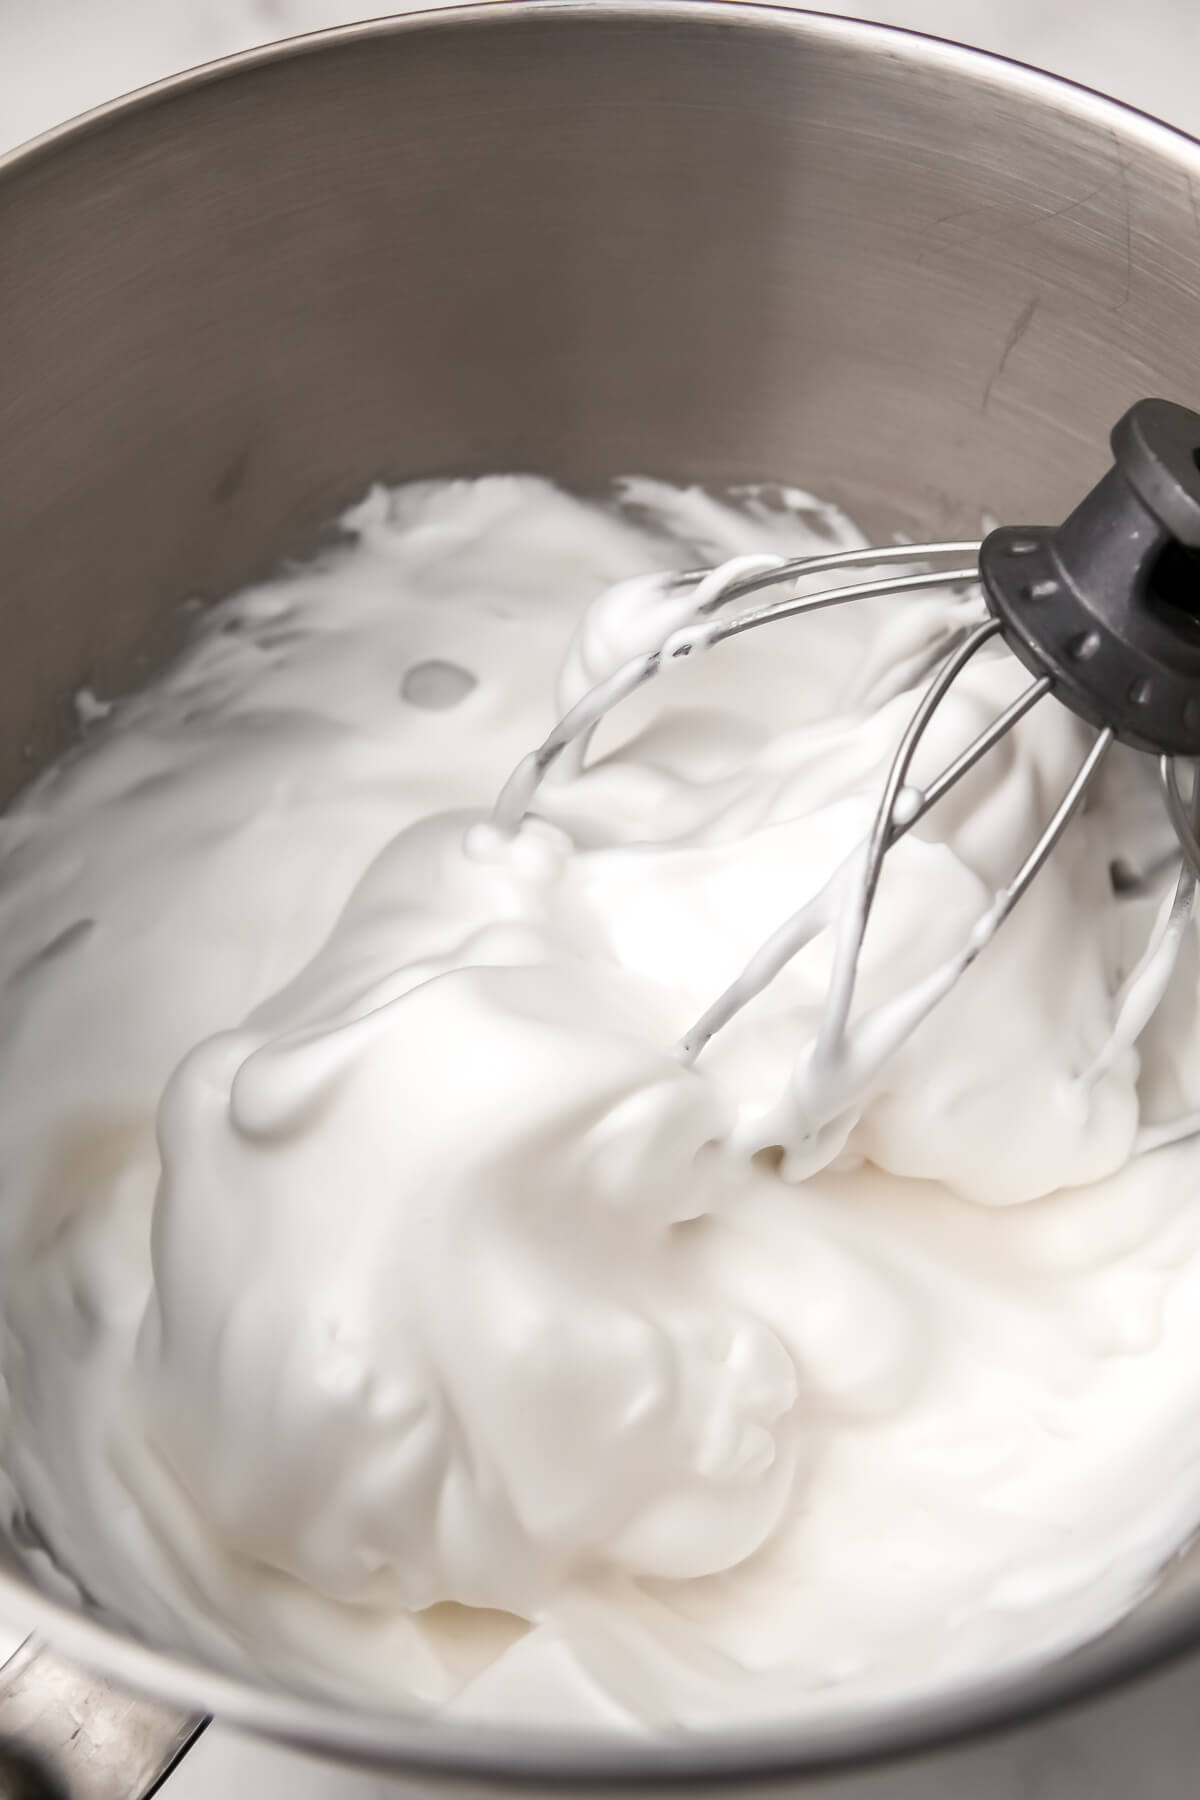 Aquafaba that has been whipped into a meringue in a metal bowl with a whisk attachment.